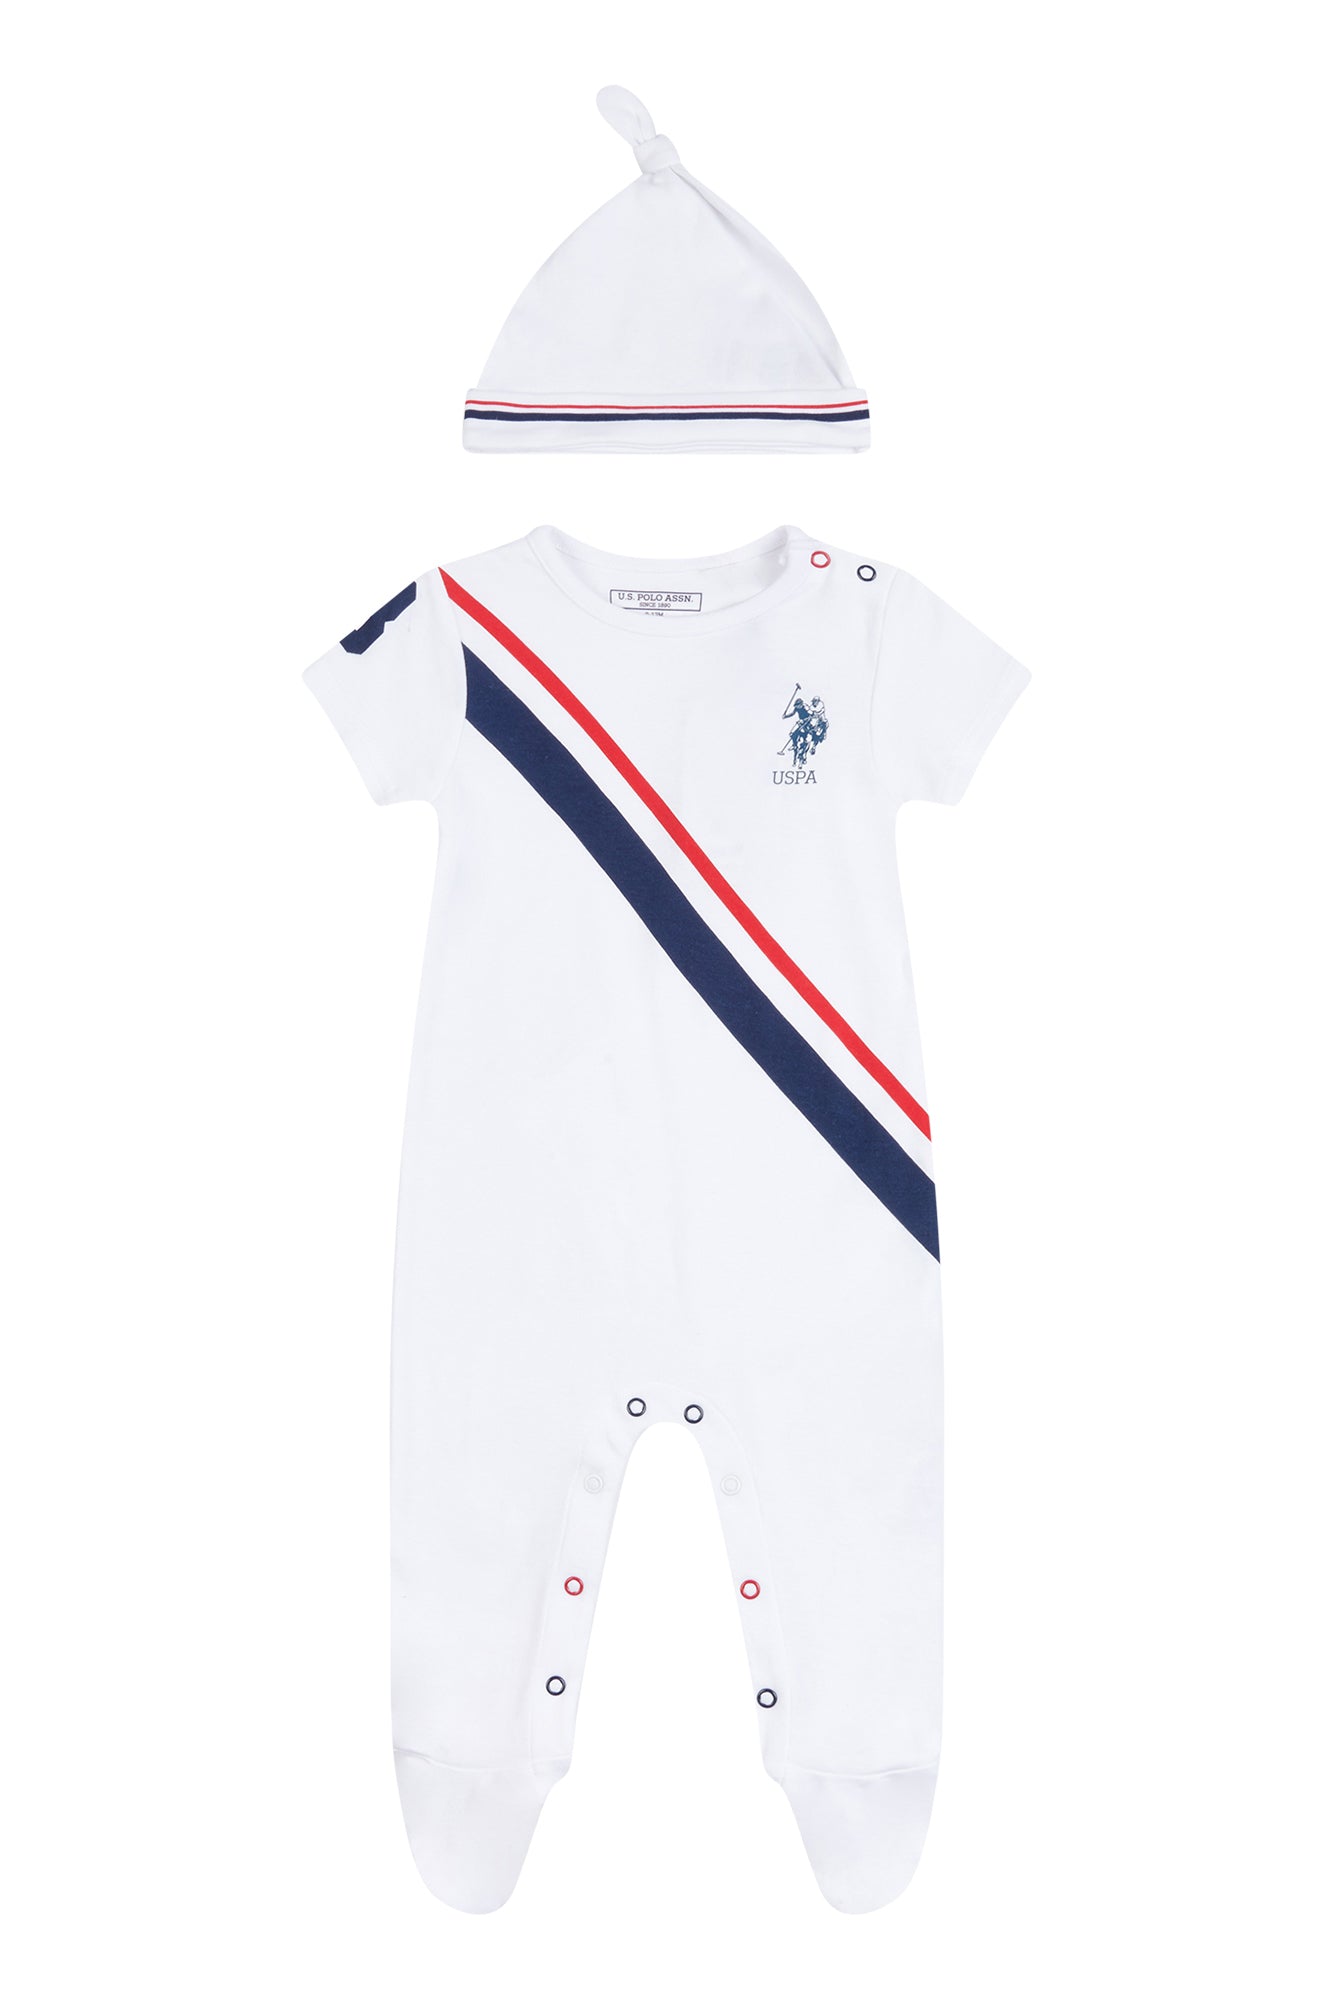 U.S. Polo Assn. Baby Player 3 Sleepsuit in Bright White